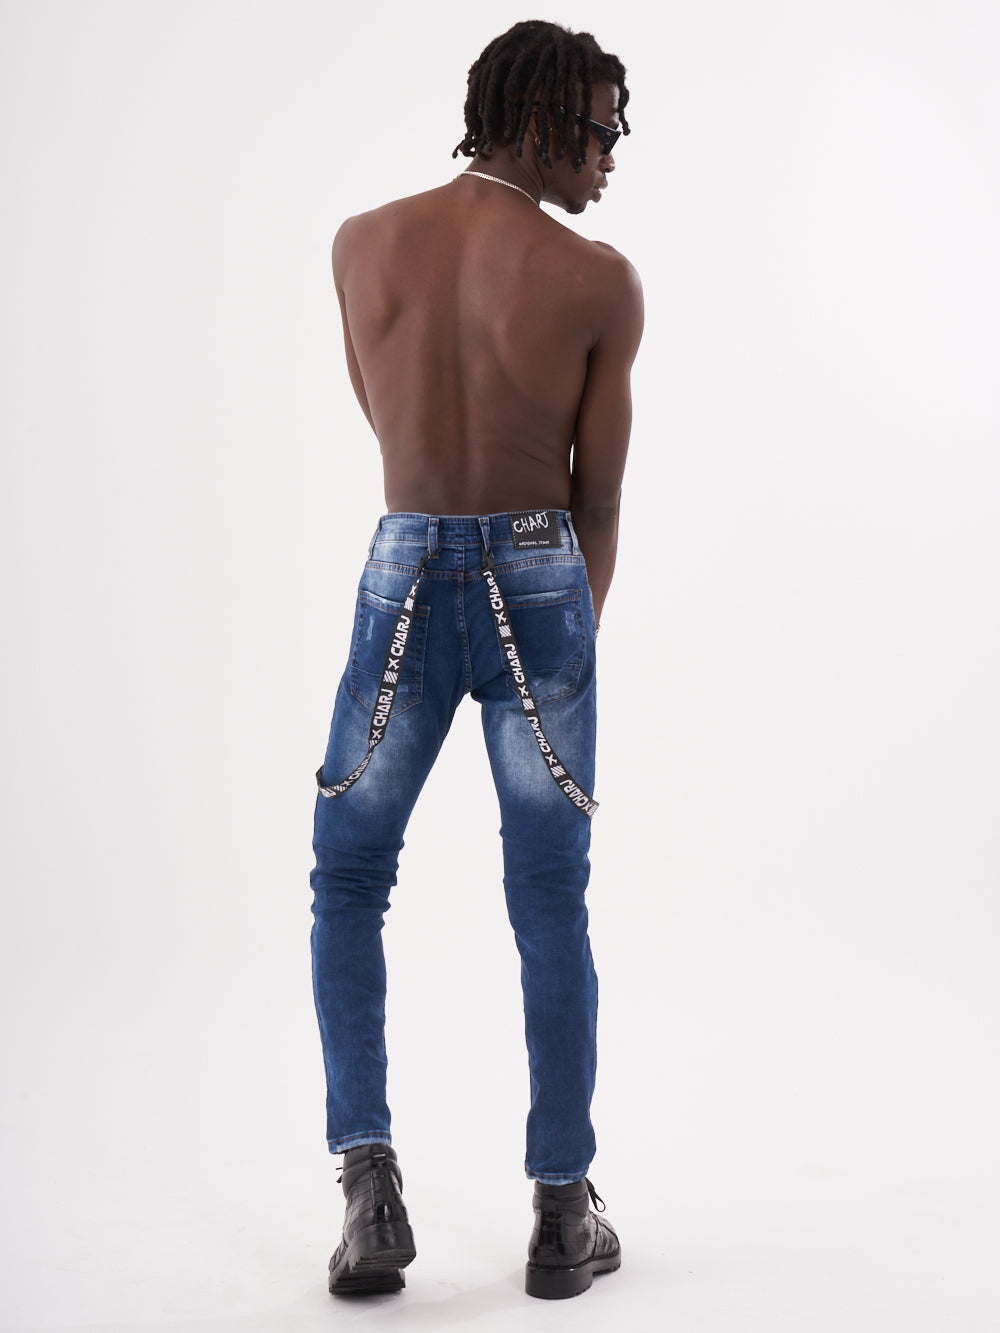 The back view of a man wearing TORNADO BLUE with chains.